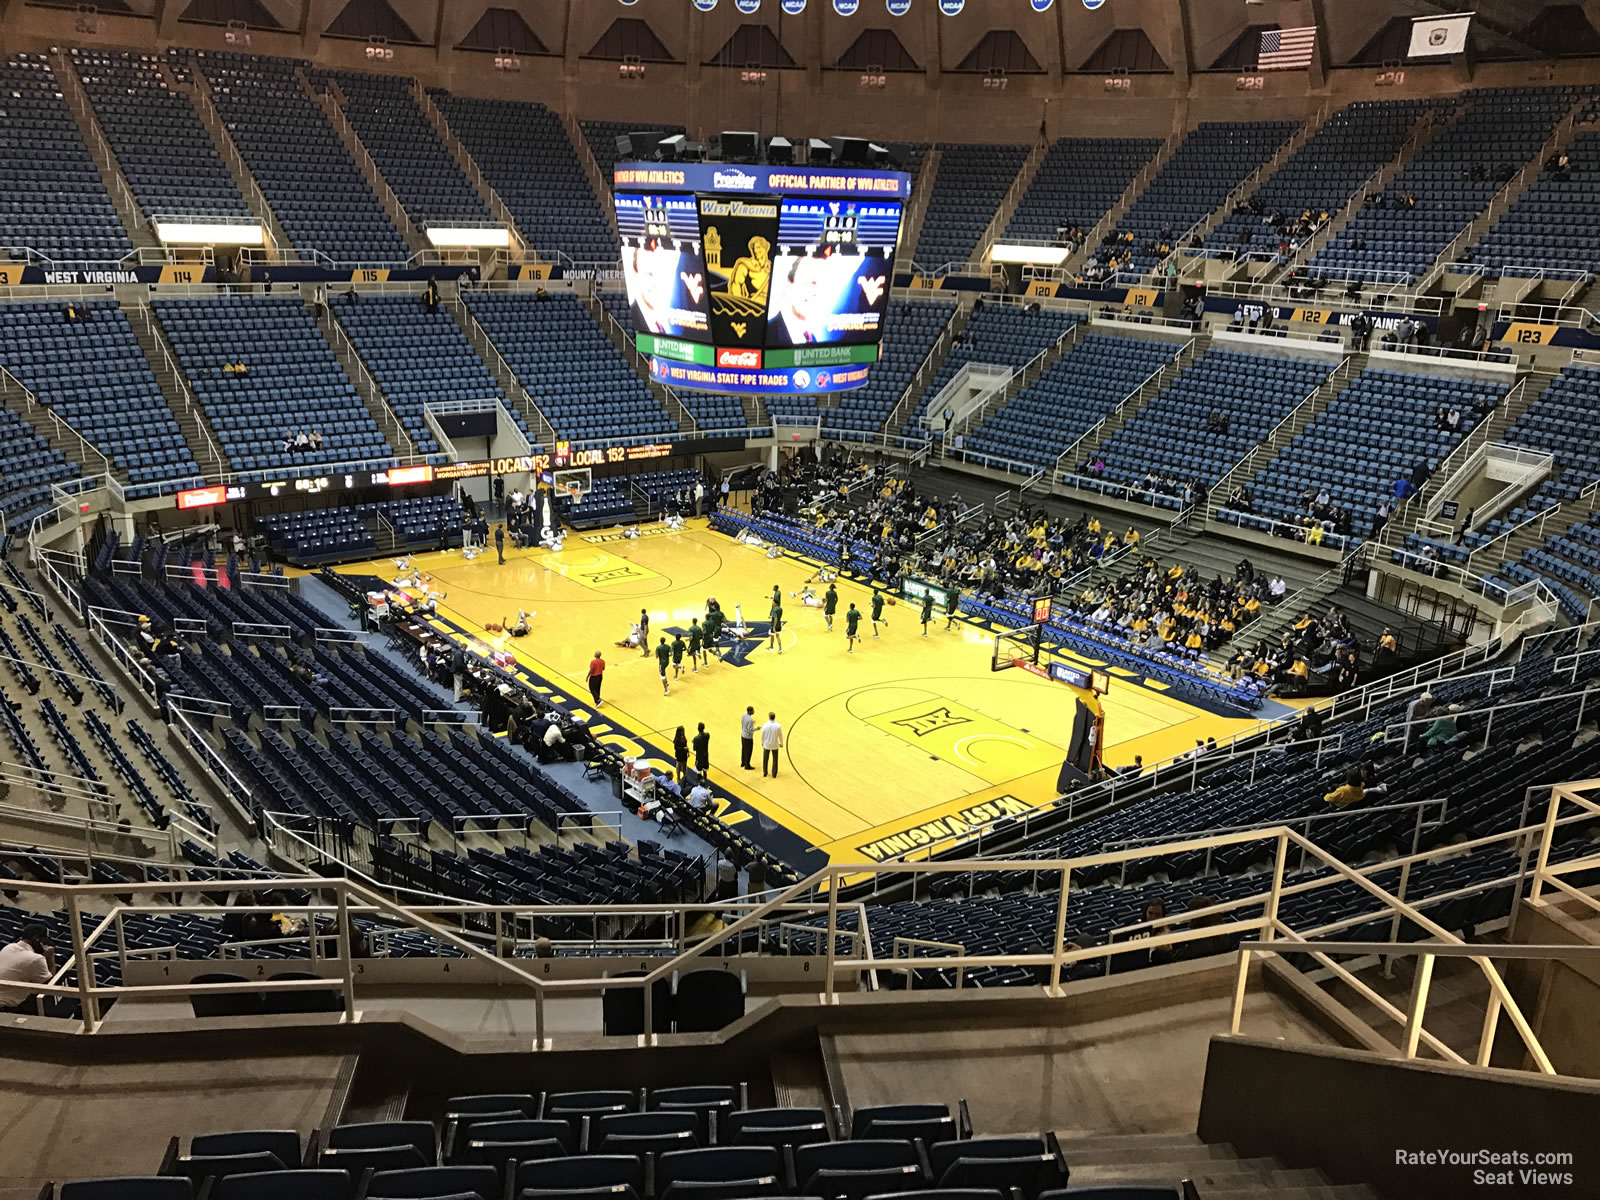 West Virginia Basketball Arena Seating Chart